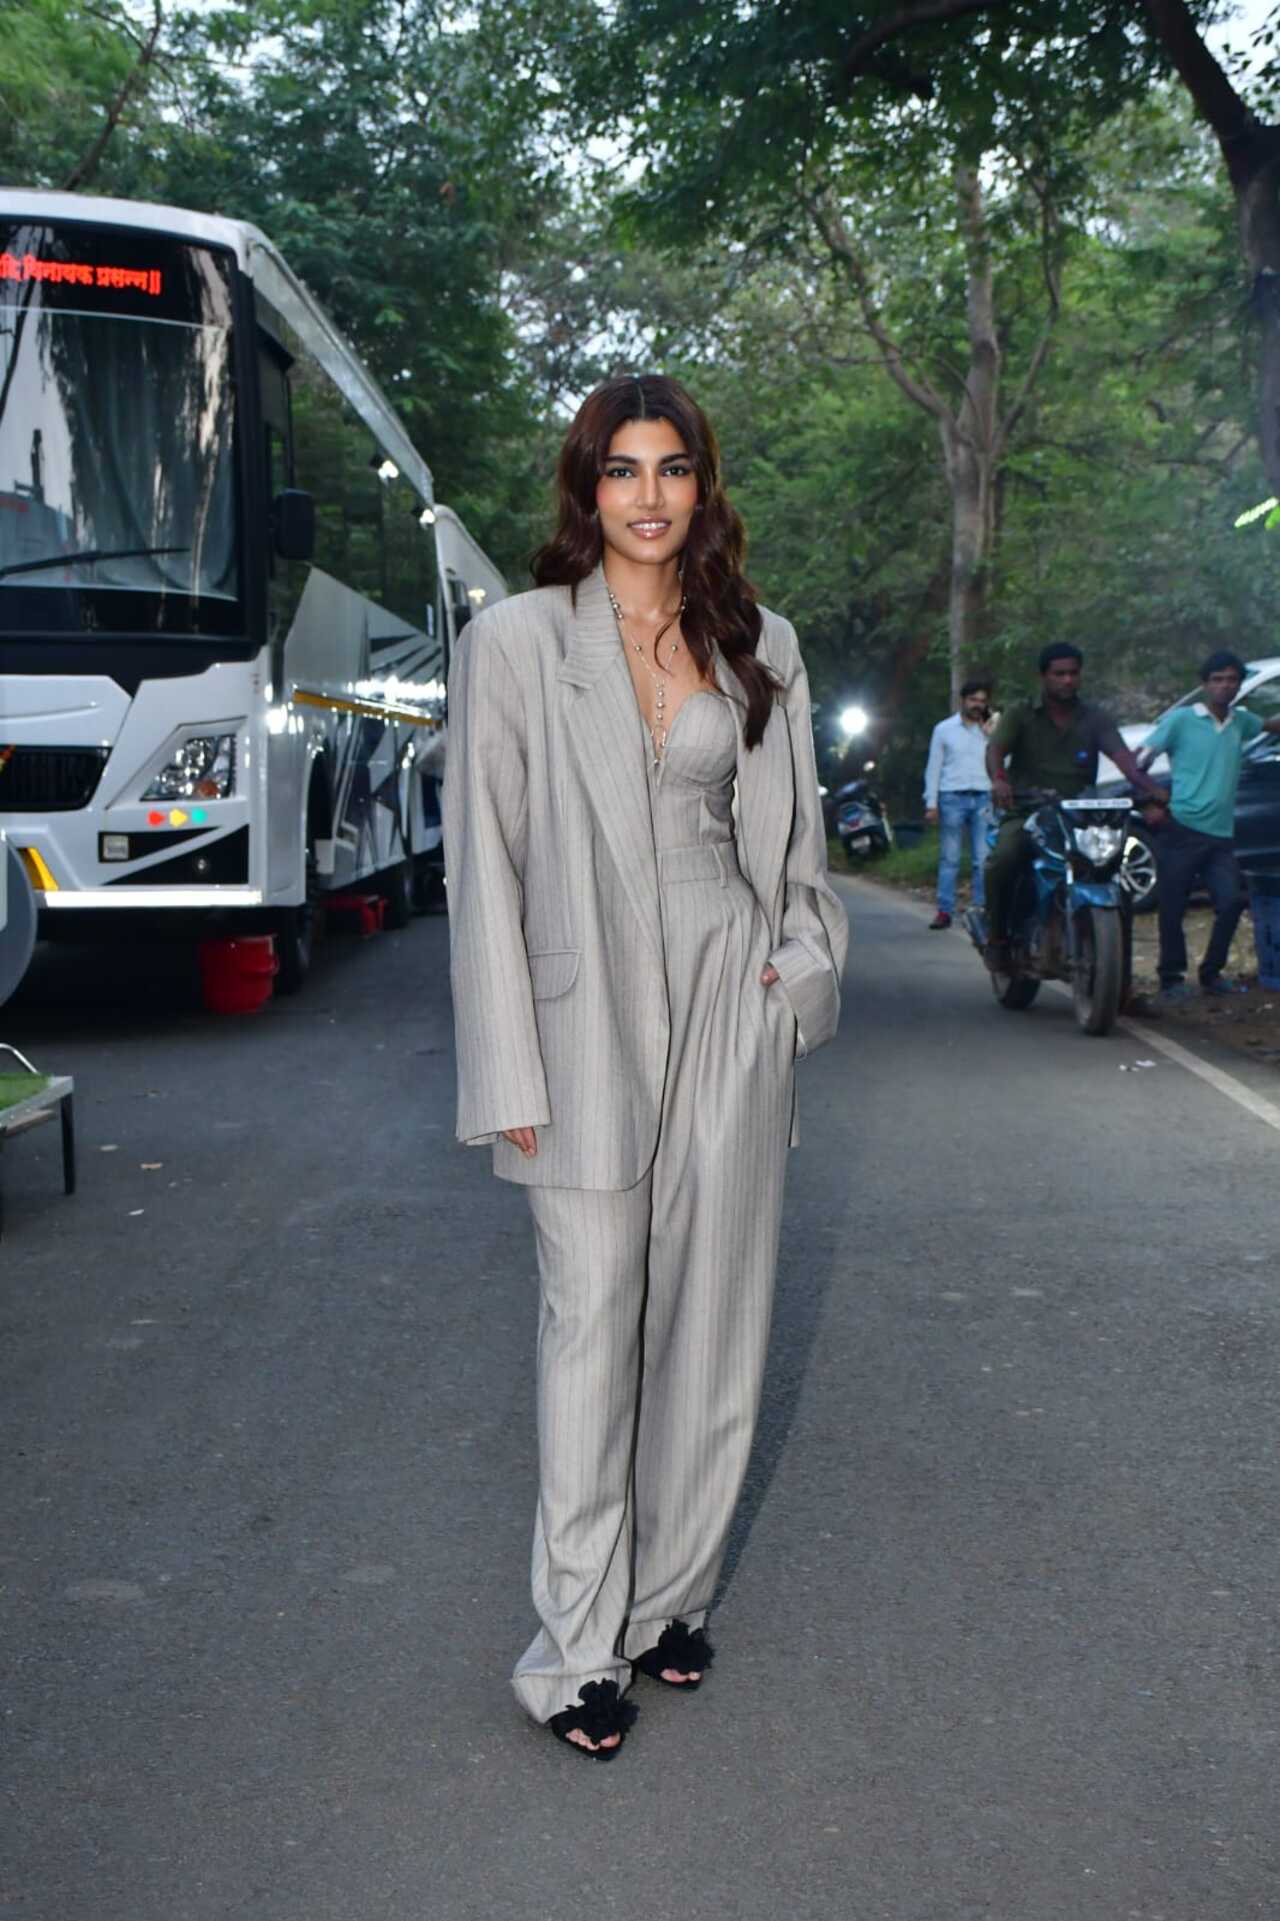 Alizeh Agnihotri, who is debuting with Farrey, looked lovely in a grey pantsuit